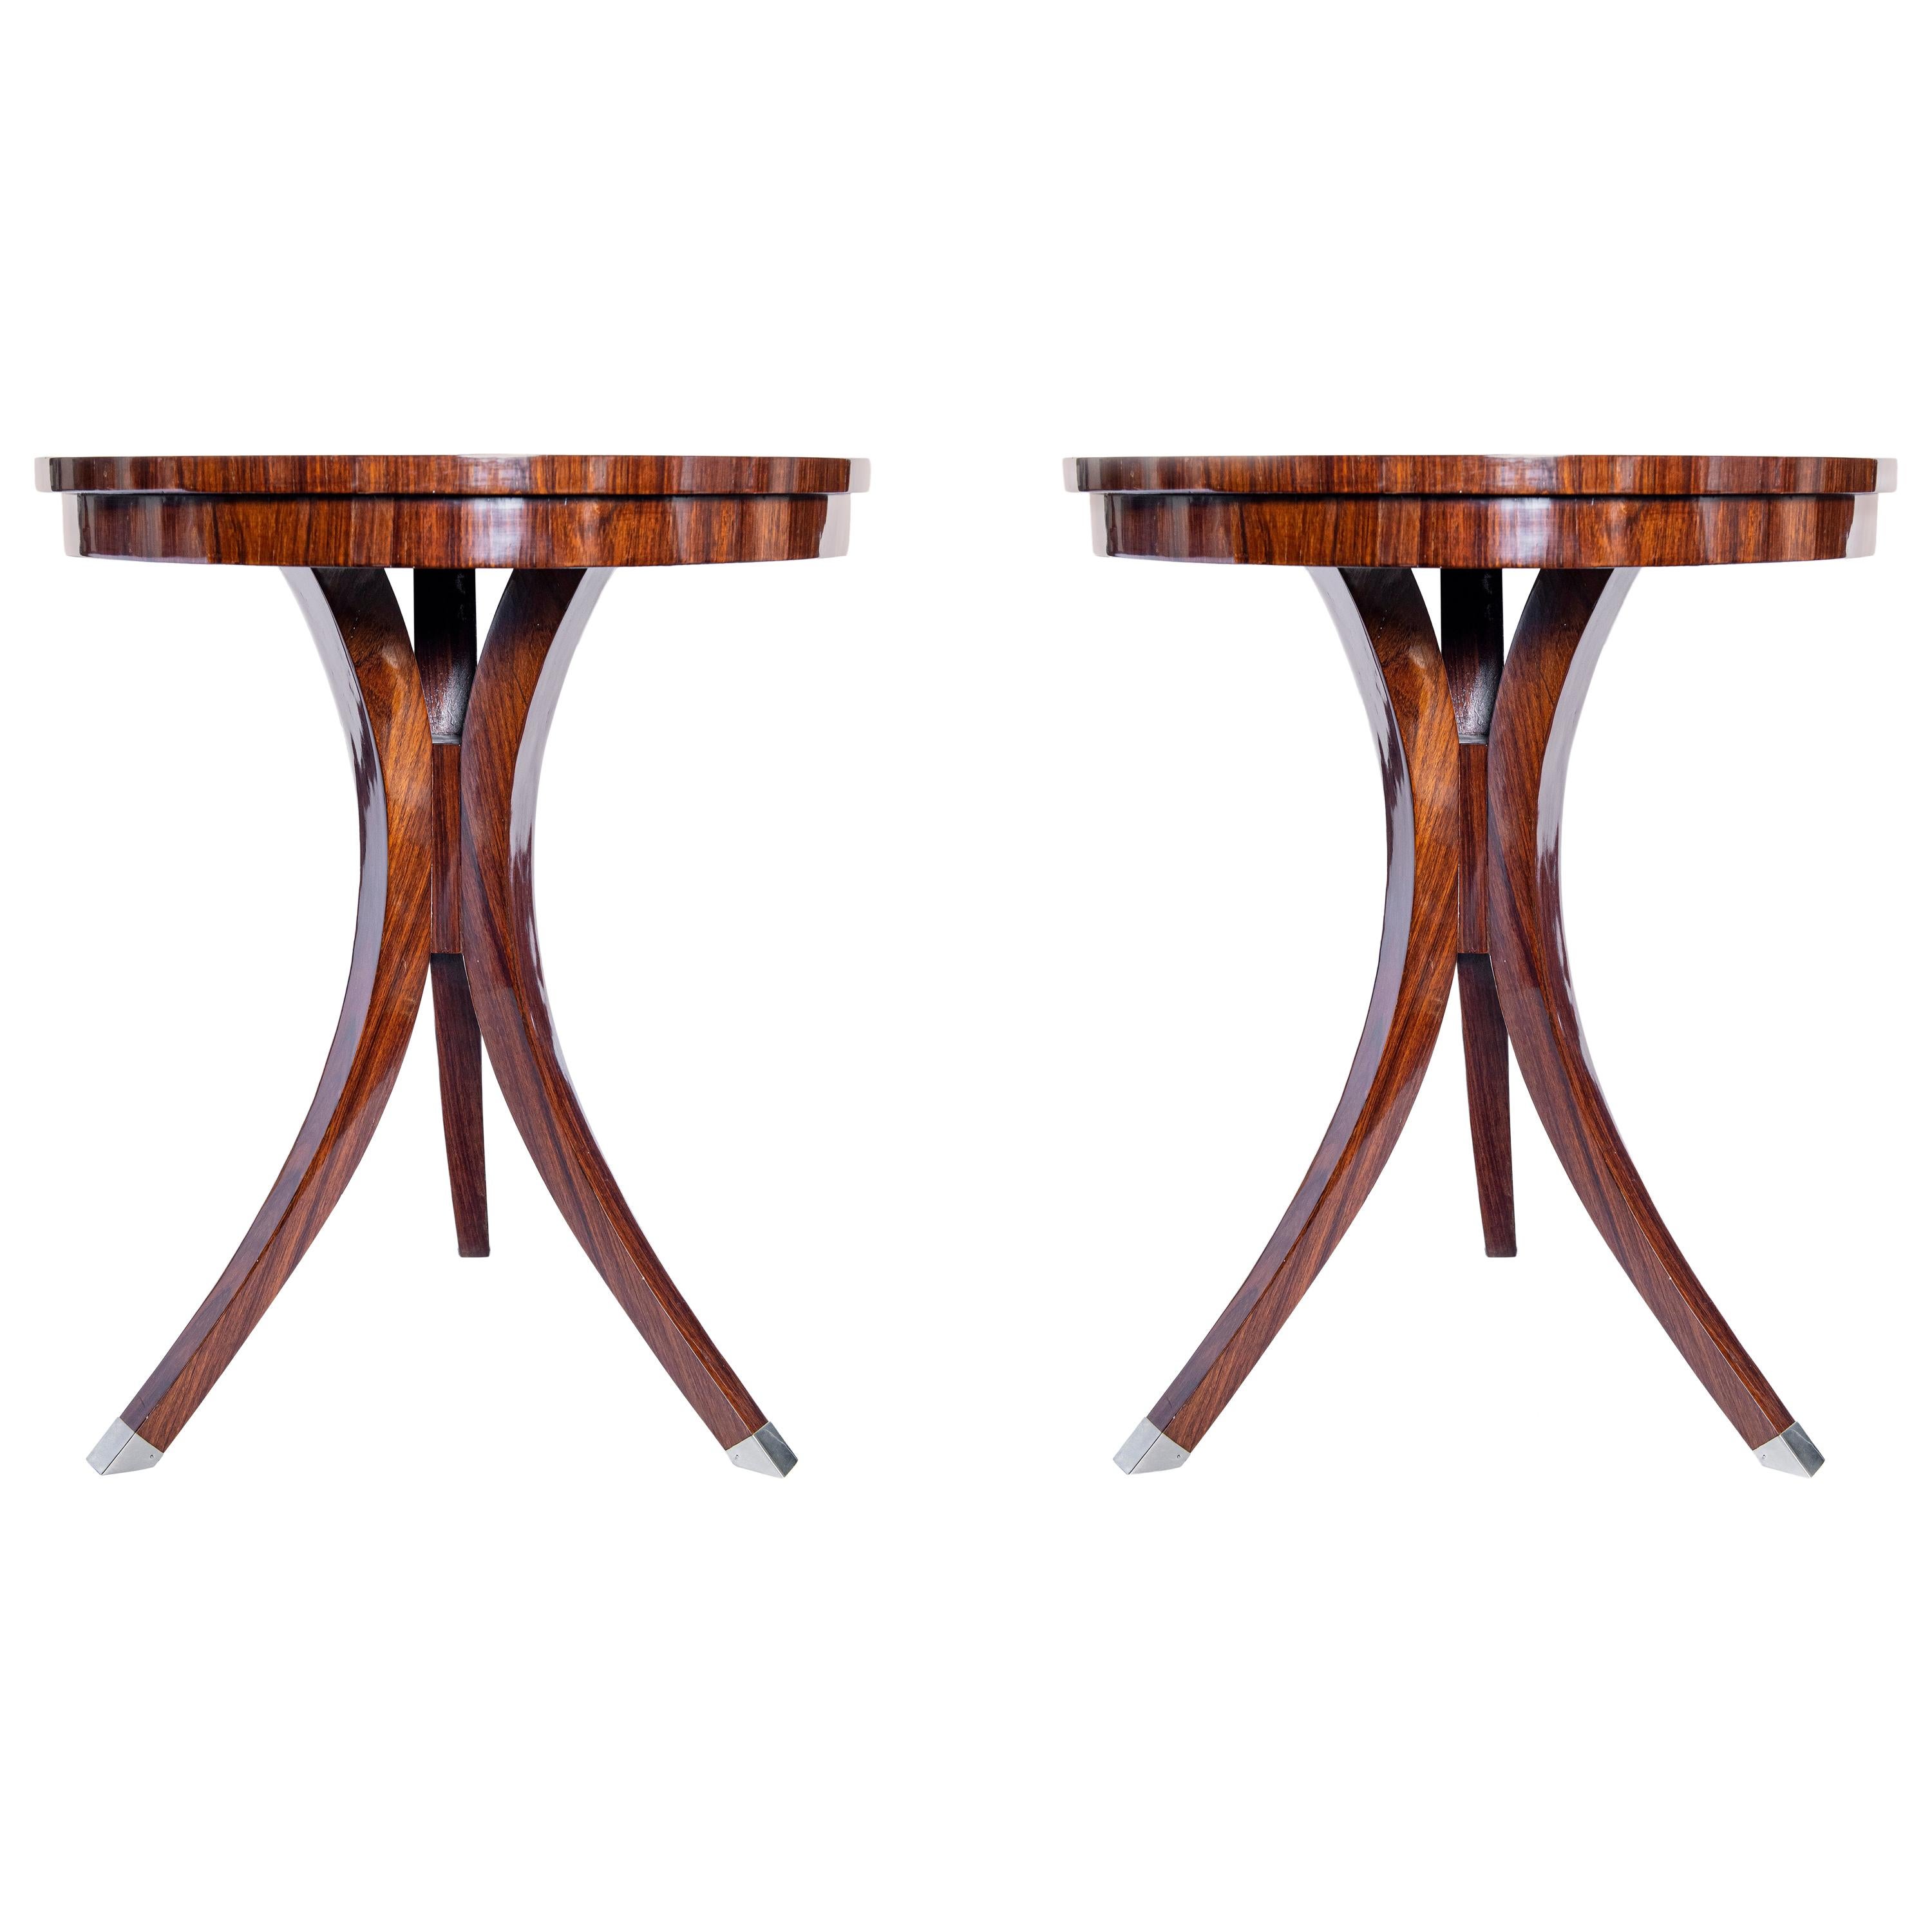 Pair of Wood Side Tables, Art Deco Period, France, circa 1940